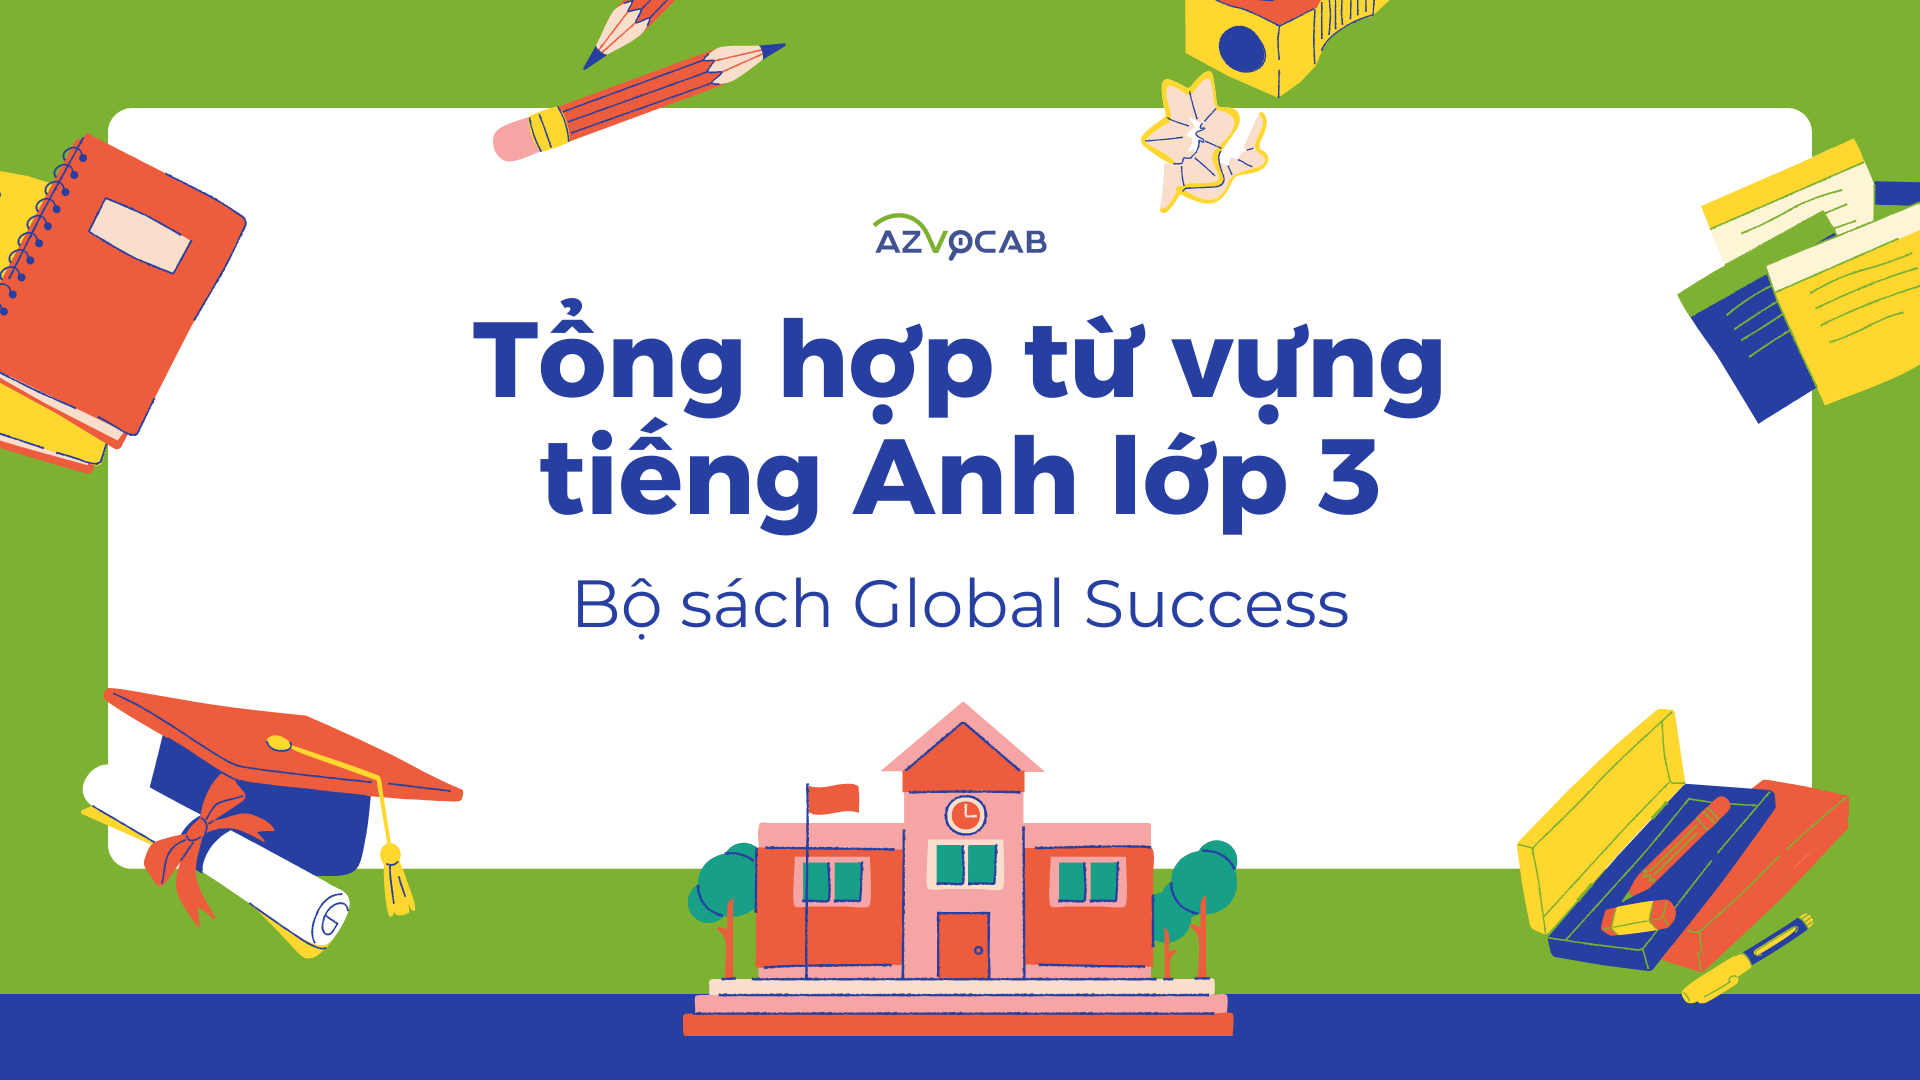 Tiếng Anh lớp 3 Global Success